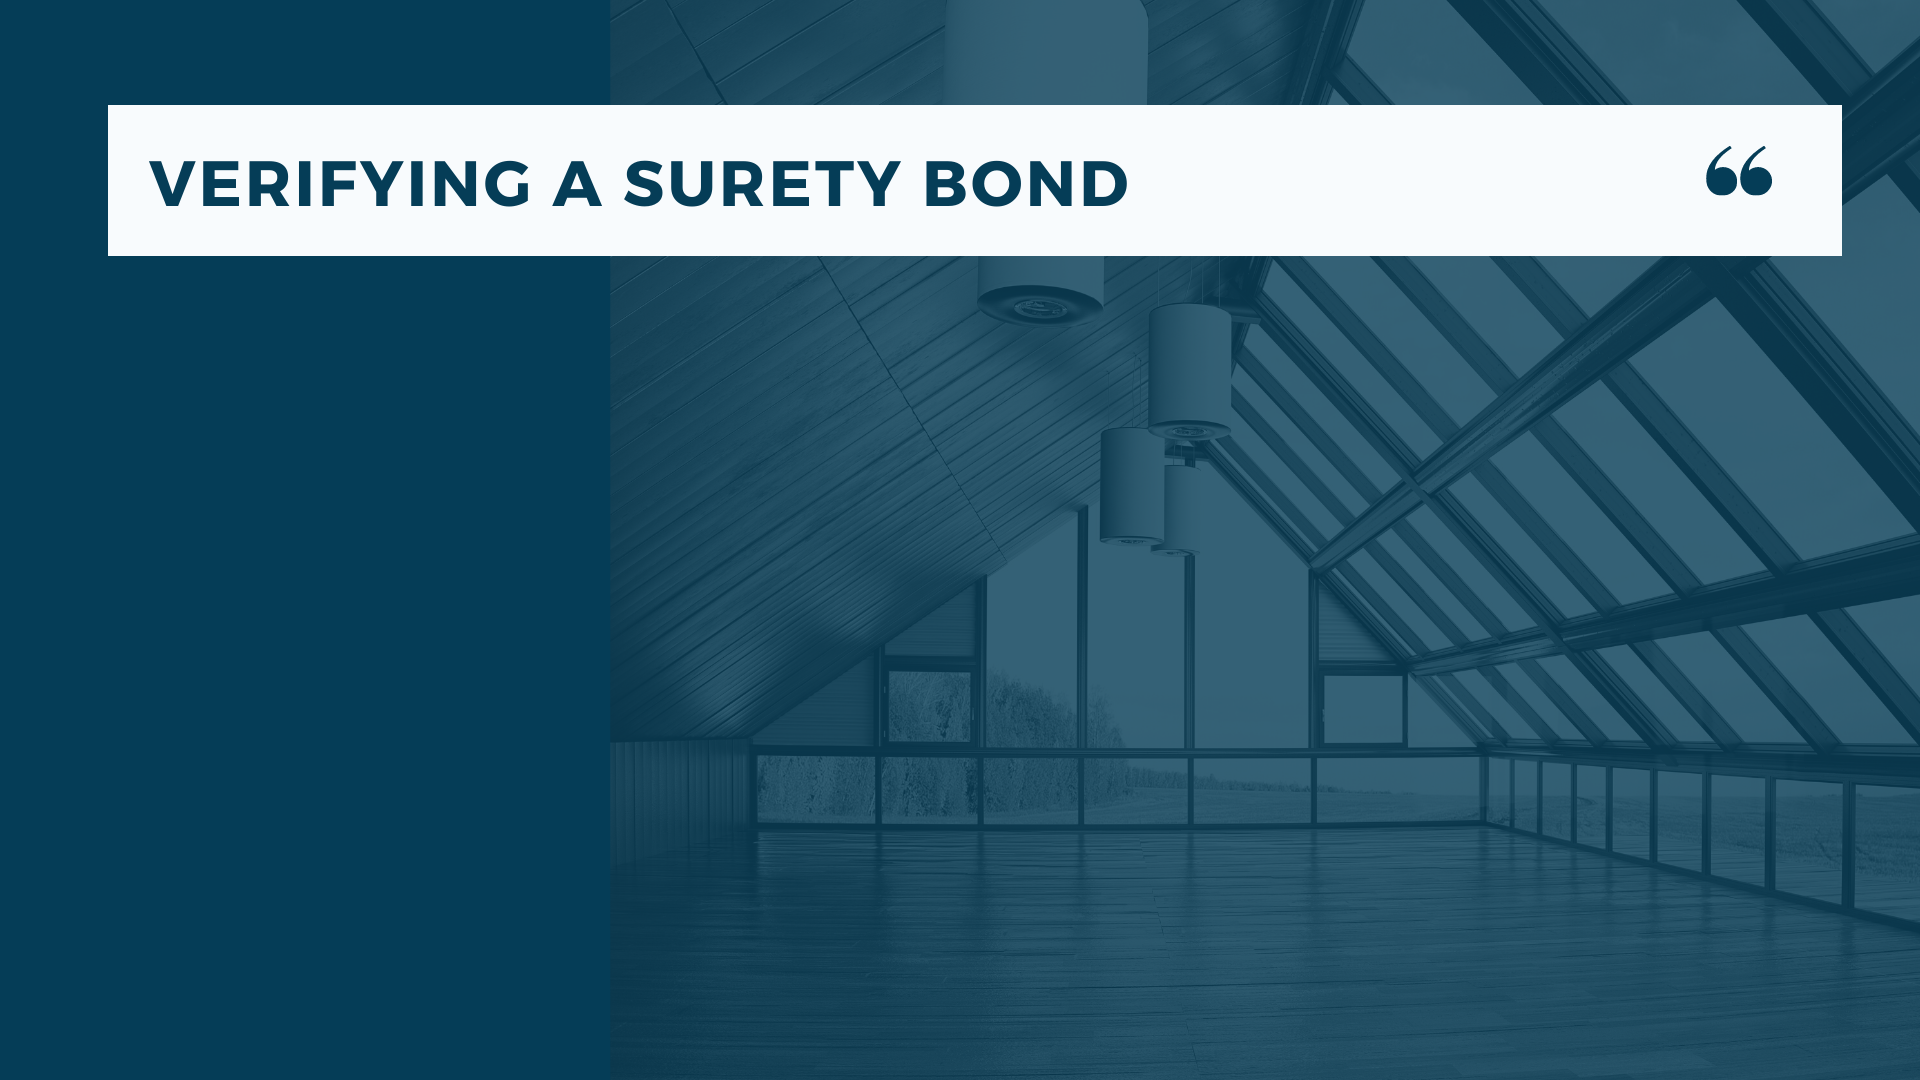 surety bond - How can you verify a surety bond - modern building in blue hue